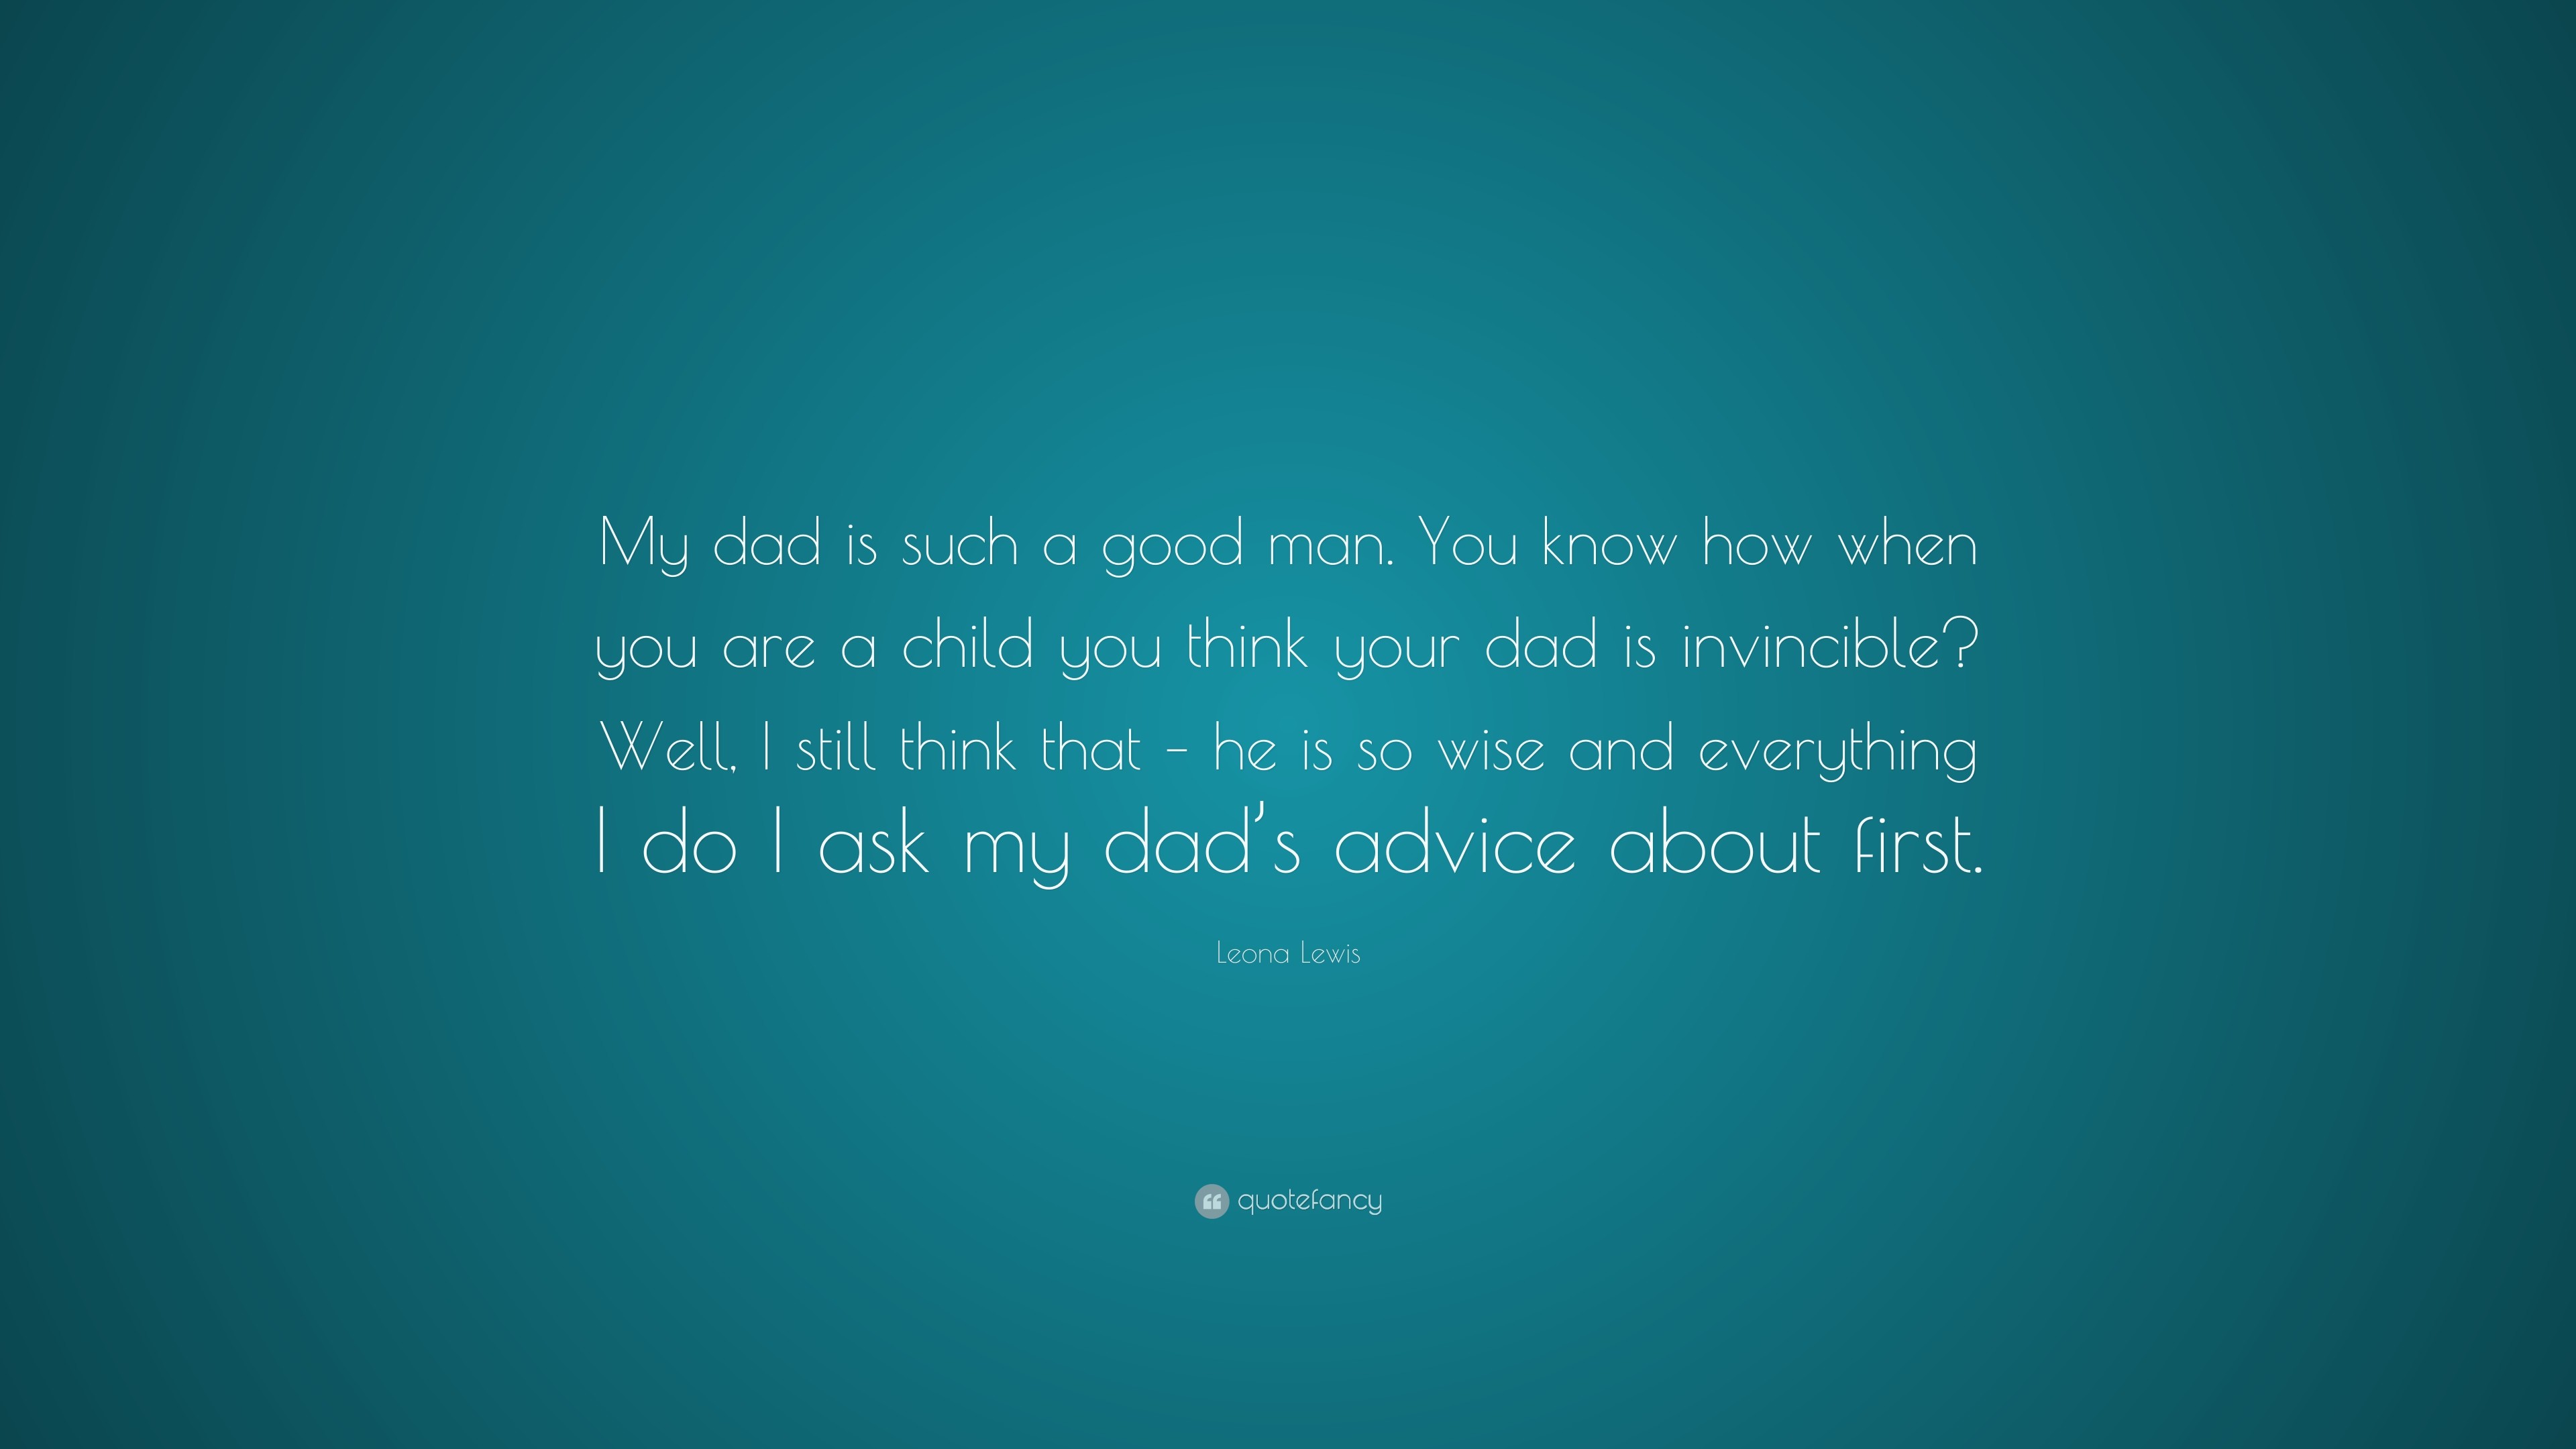 3840x2160 Leona Lewis Quote: “My dad is such a good man. You know how